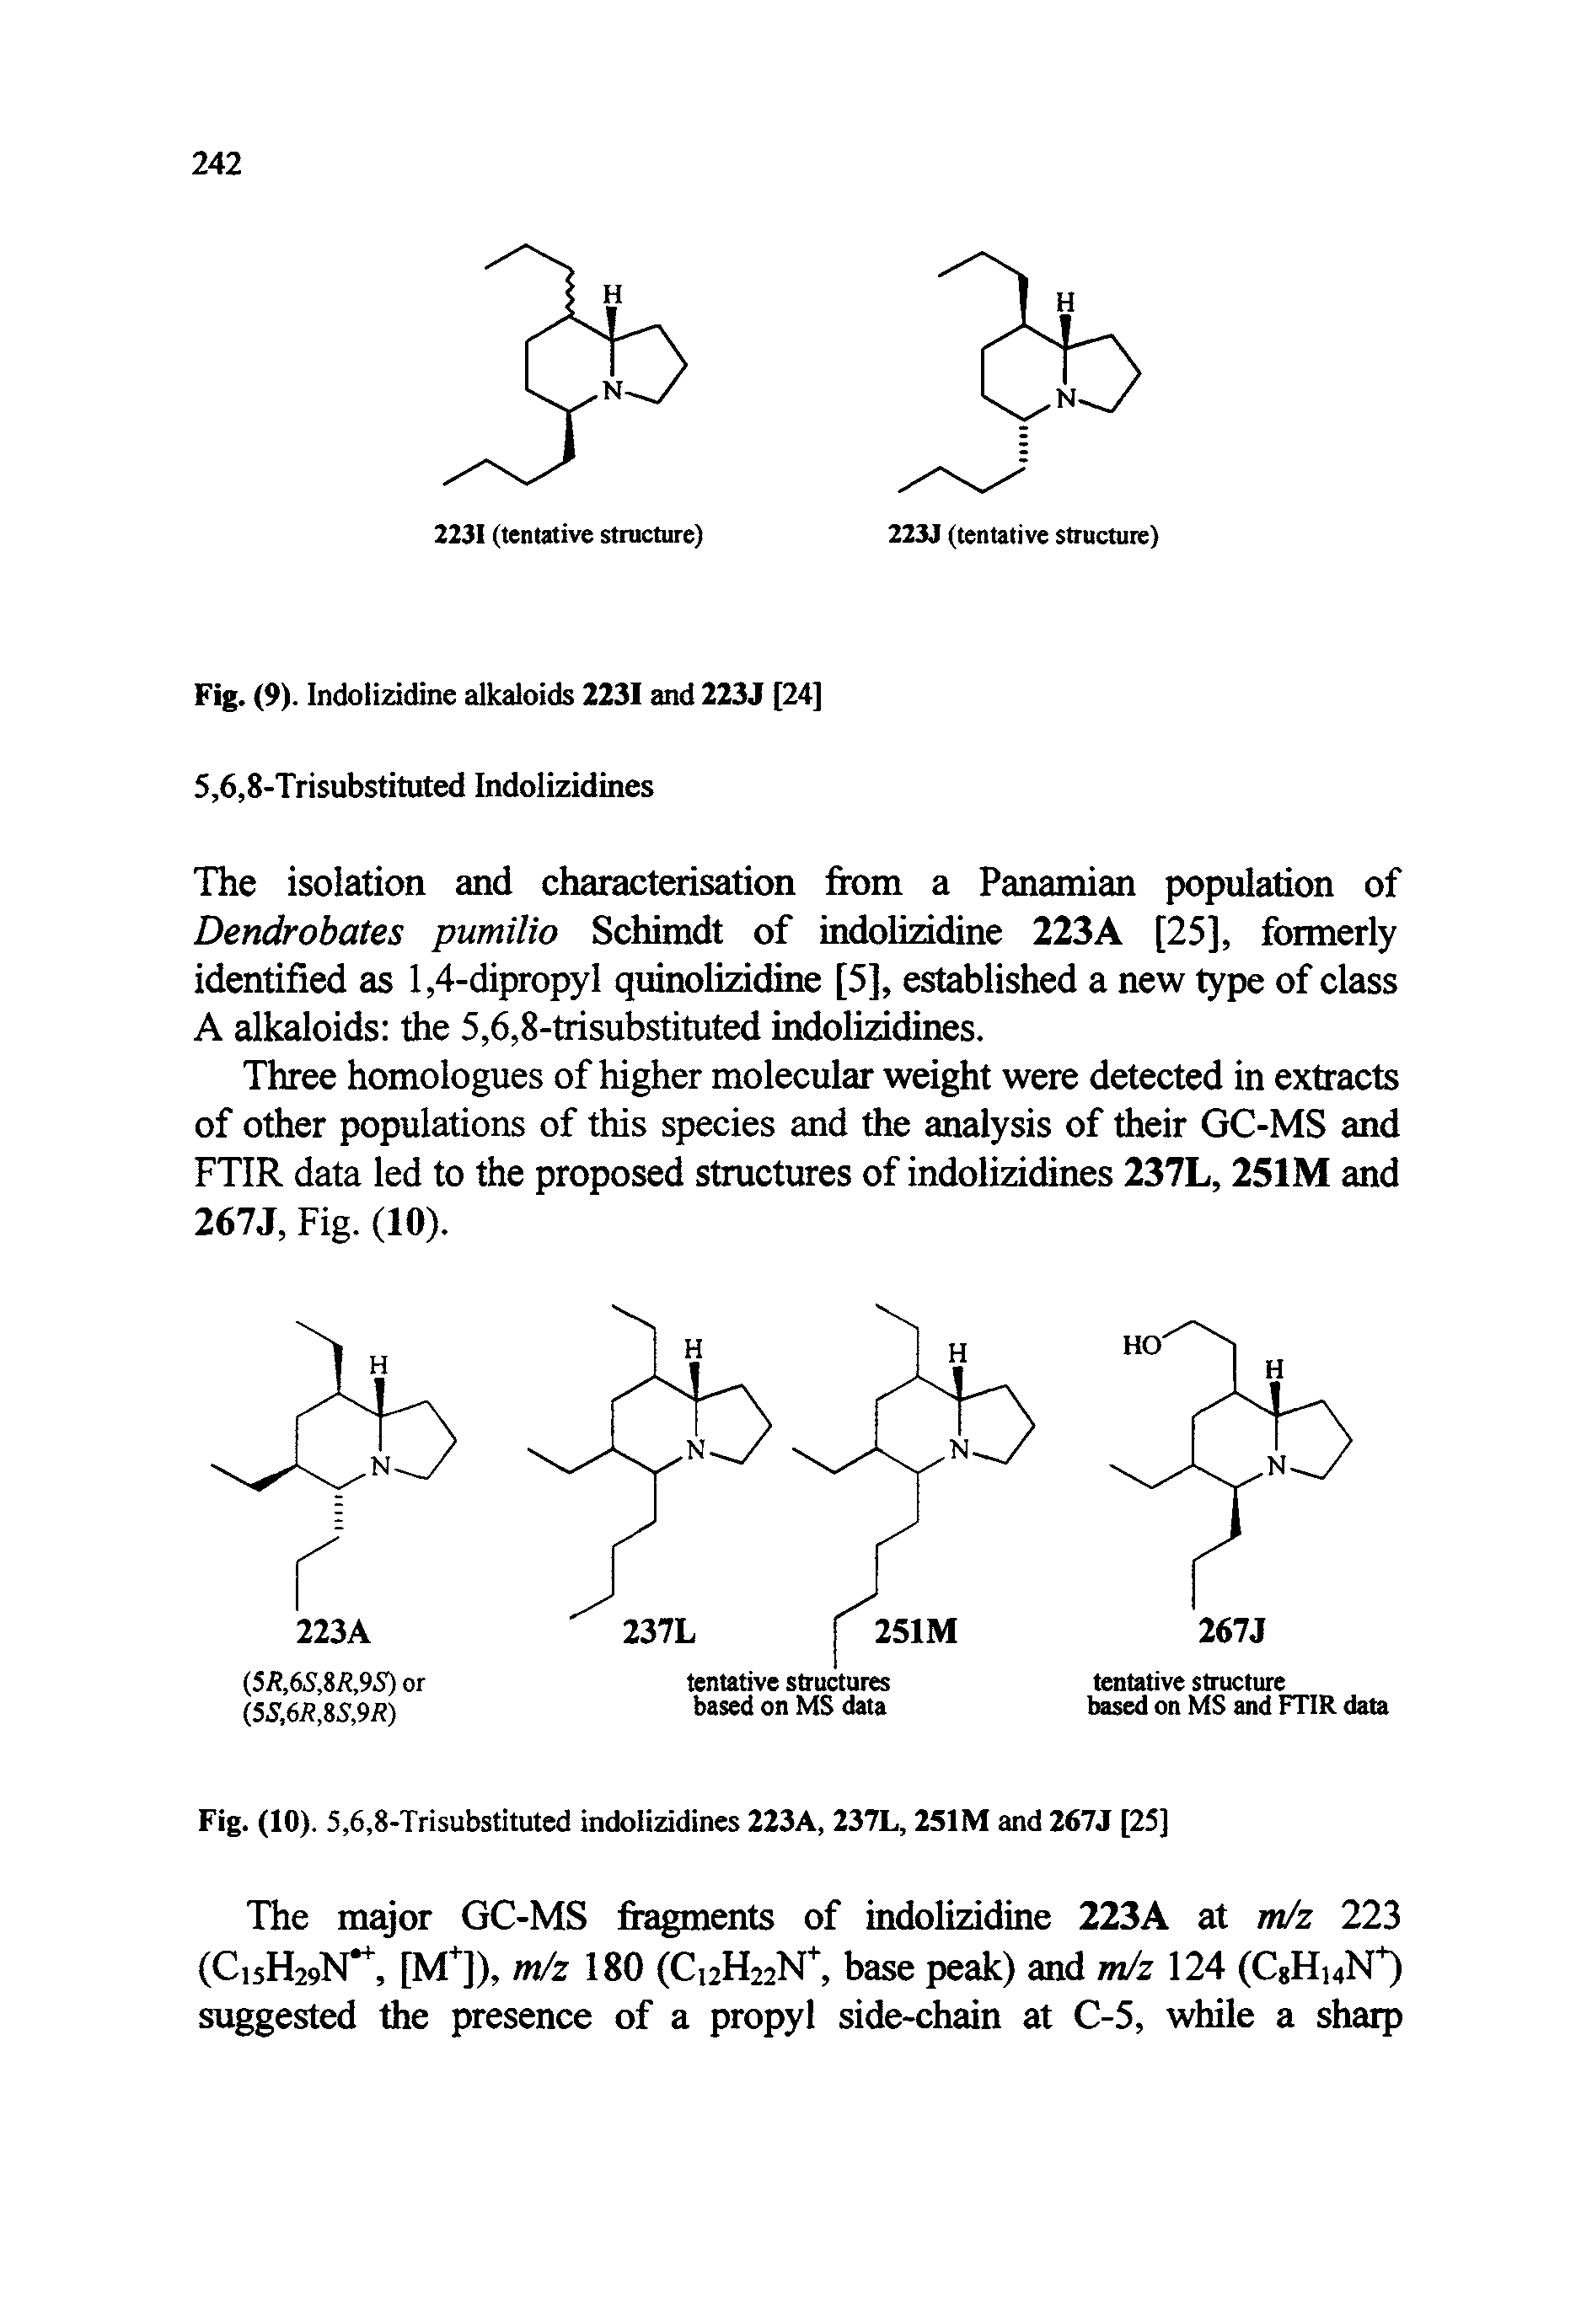 Fig. (10). 5,6,8-Trisubstituted indolizidines 223A, 237L, 2S1M and 267J [25]...